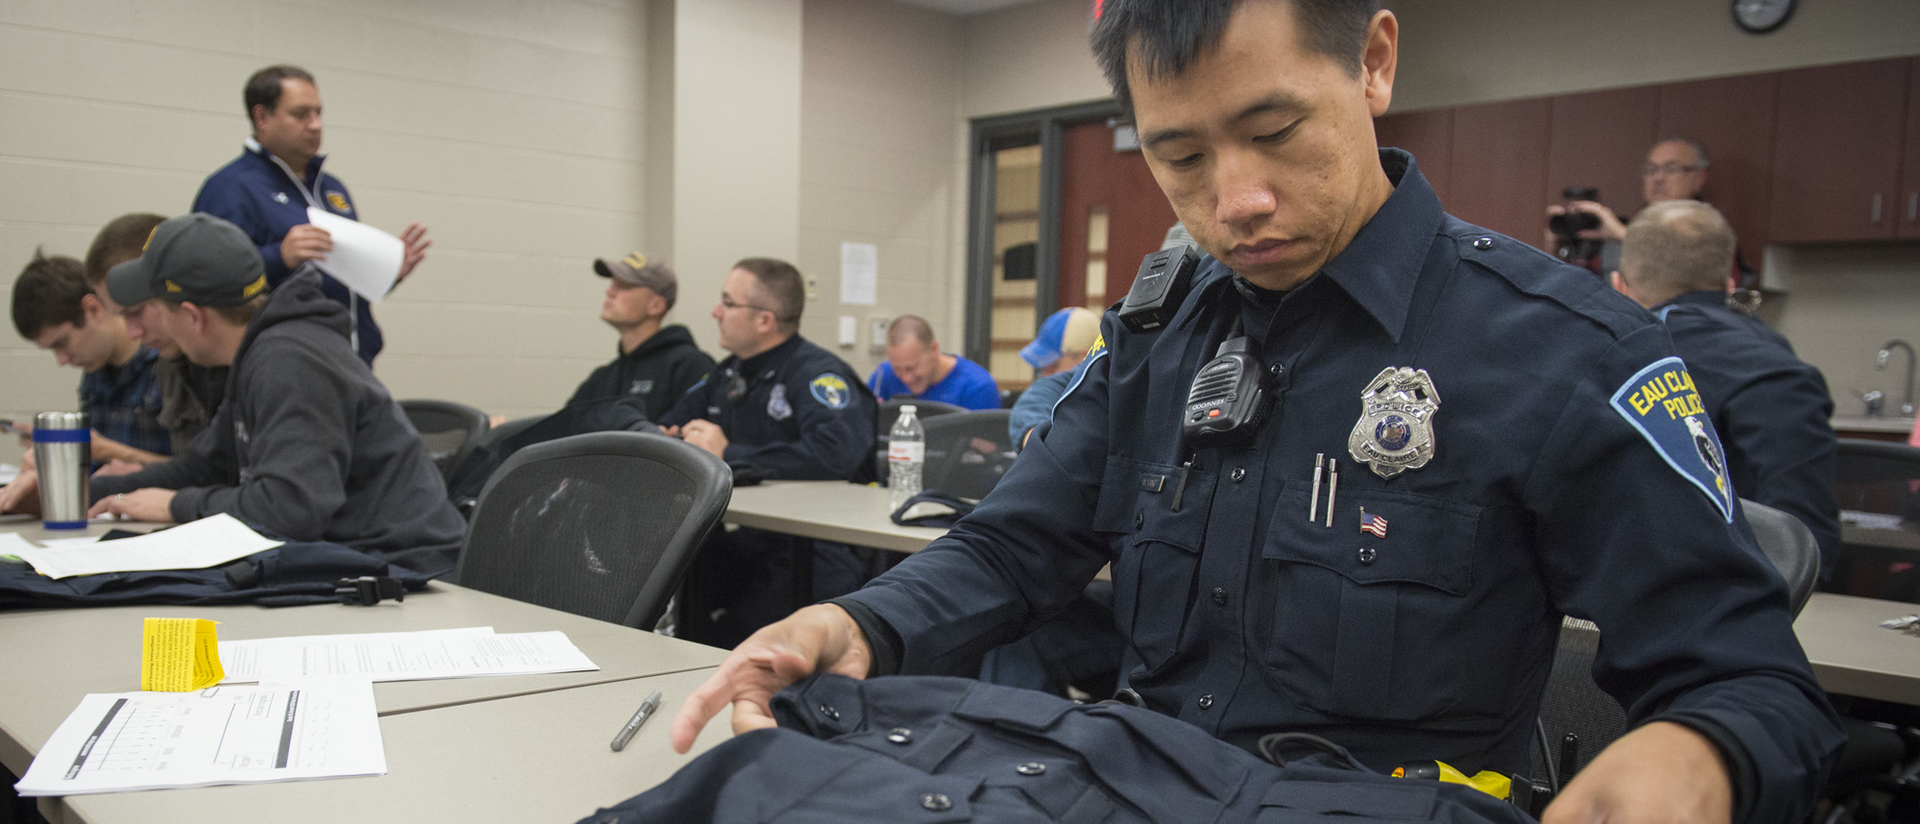 Mark Vang, an officer with the Eau Claire Police Department